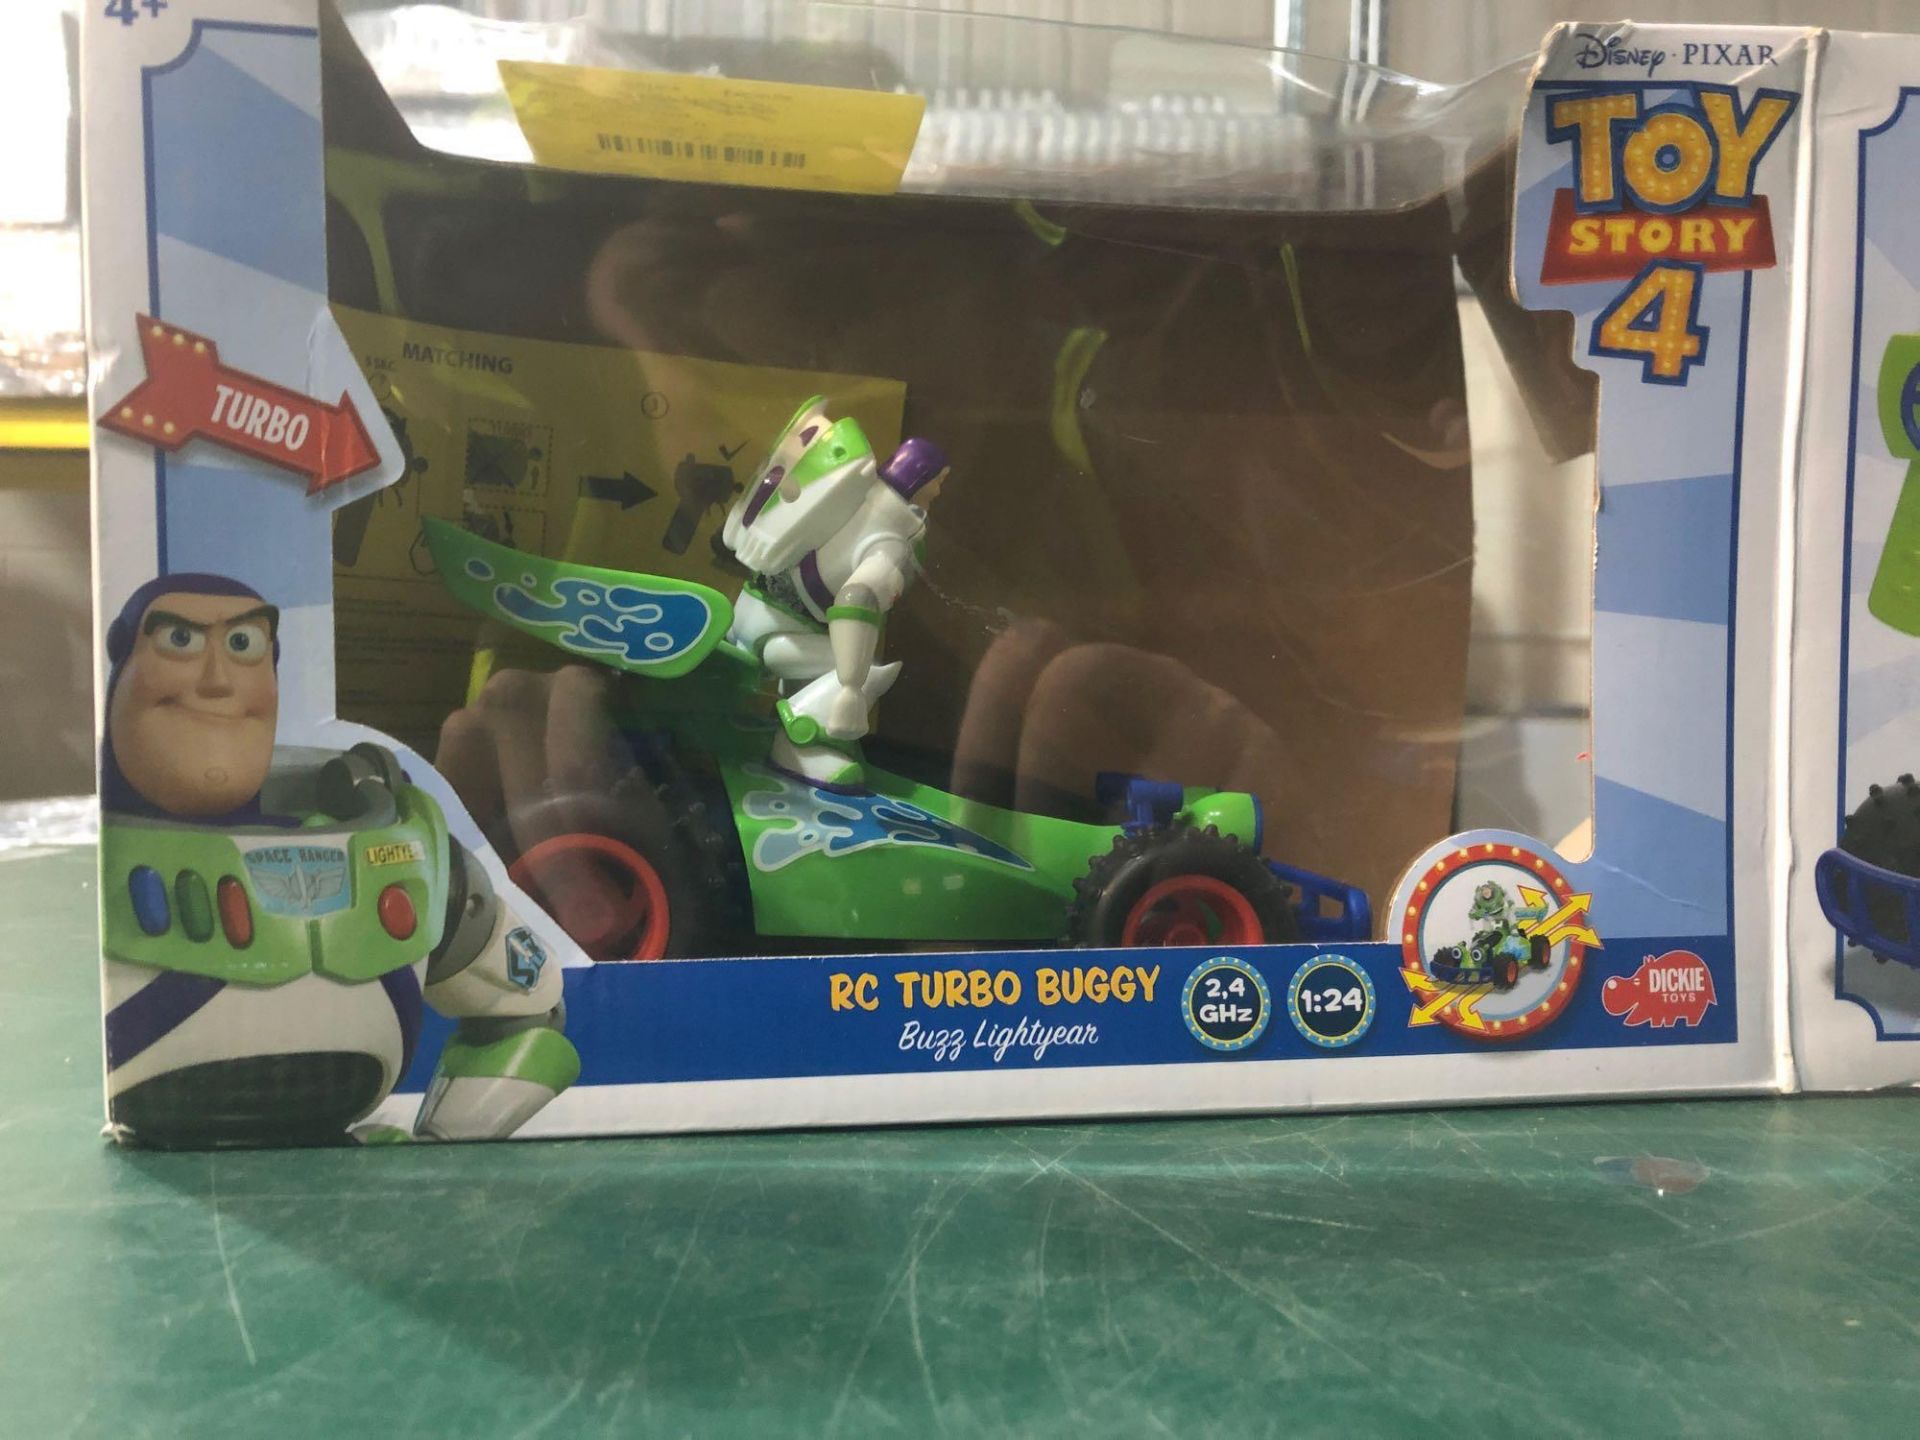 Toy Story 4 RC 1:24 Buggy Buzz Lightyear - £25.00 RRP - Image 2 of 4